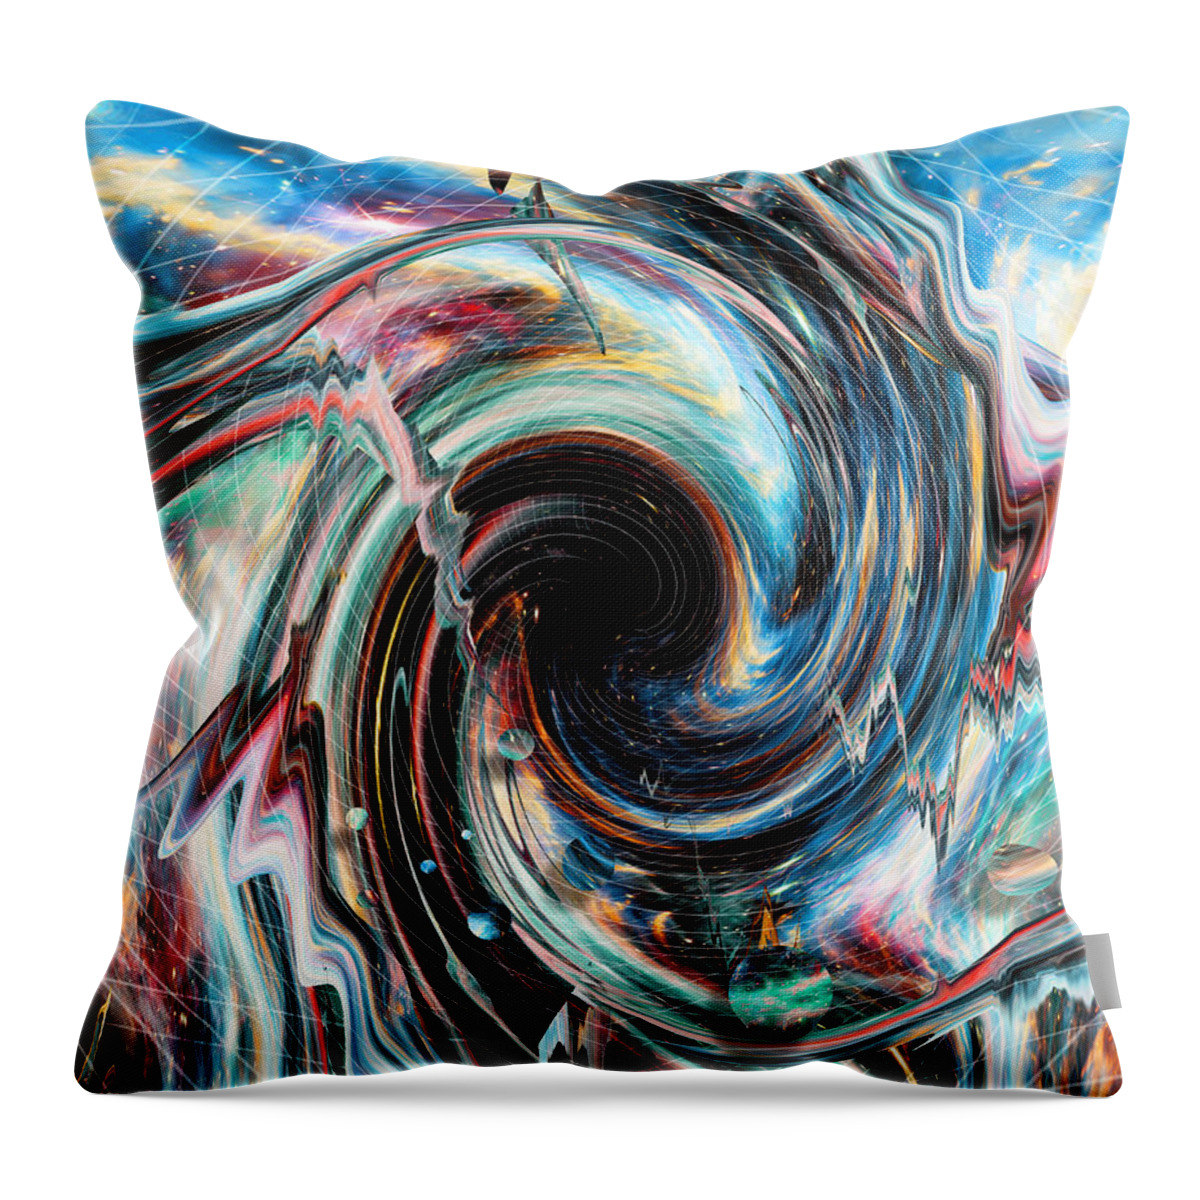 Trippy Throw Pillow featuring the digital art Pipe Dream by Nicebleed 